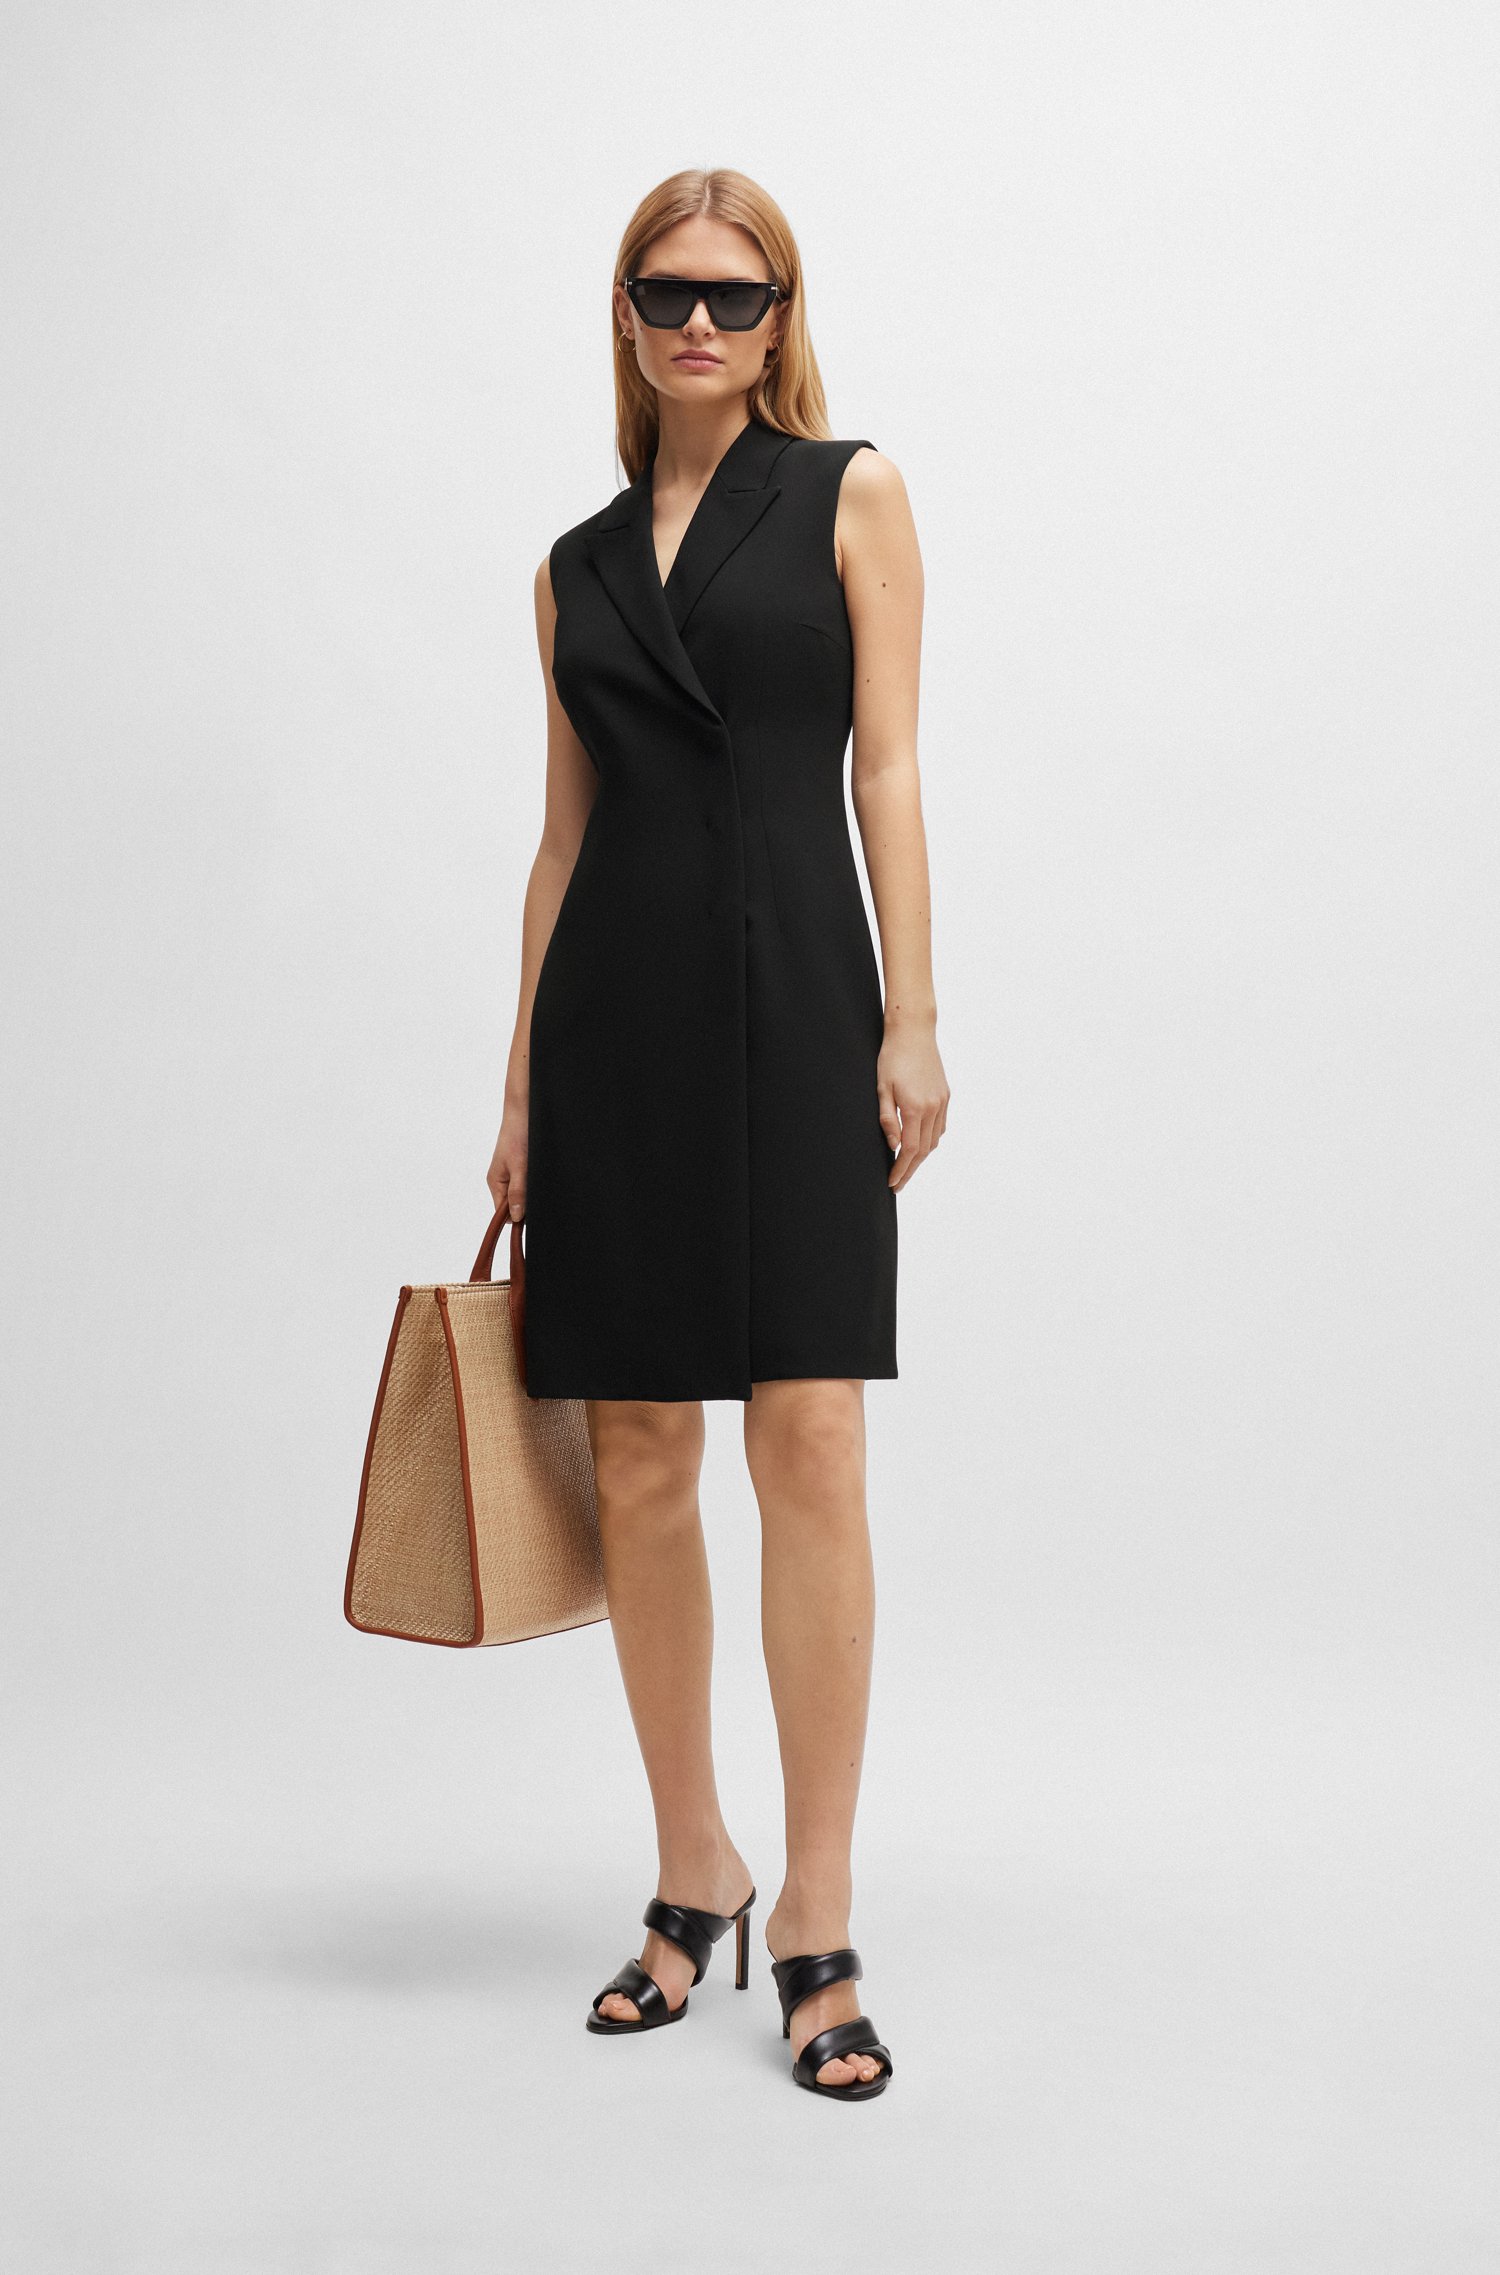 Blazer-style sleeveless dress with concealed closure